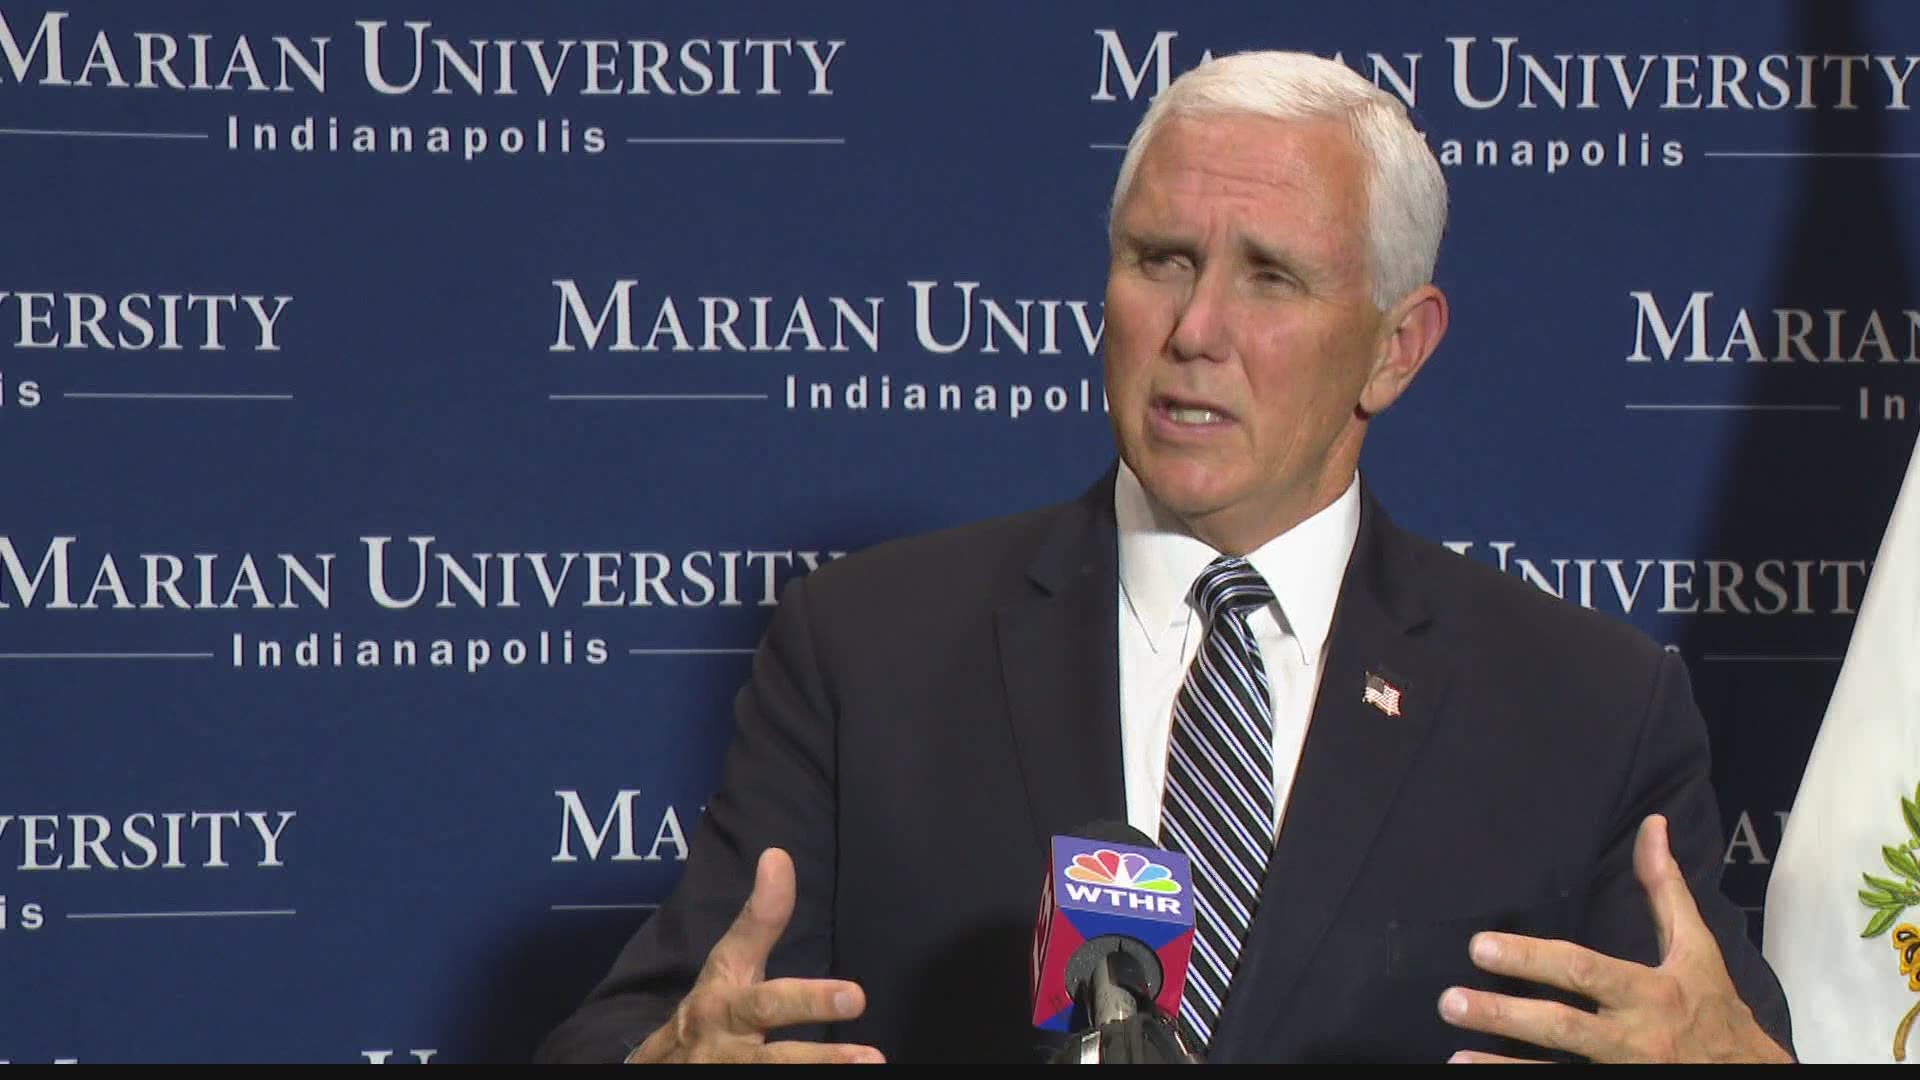 In an exclusive interview with 13News anchor Scott Swan, Vice President Mike Pence said "the risk of serious illness to healthy children is very low."